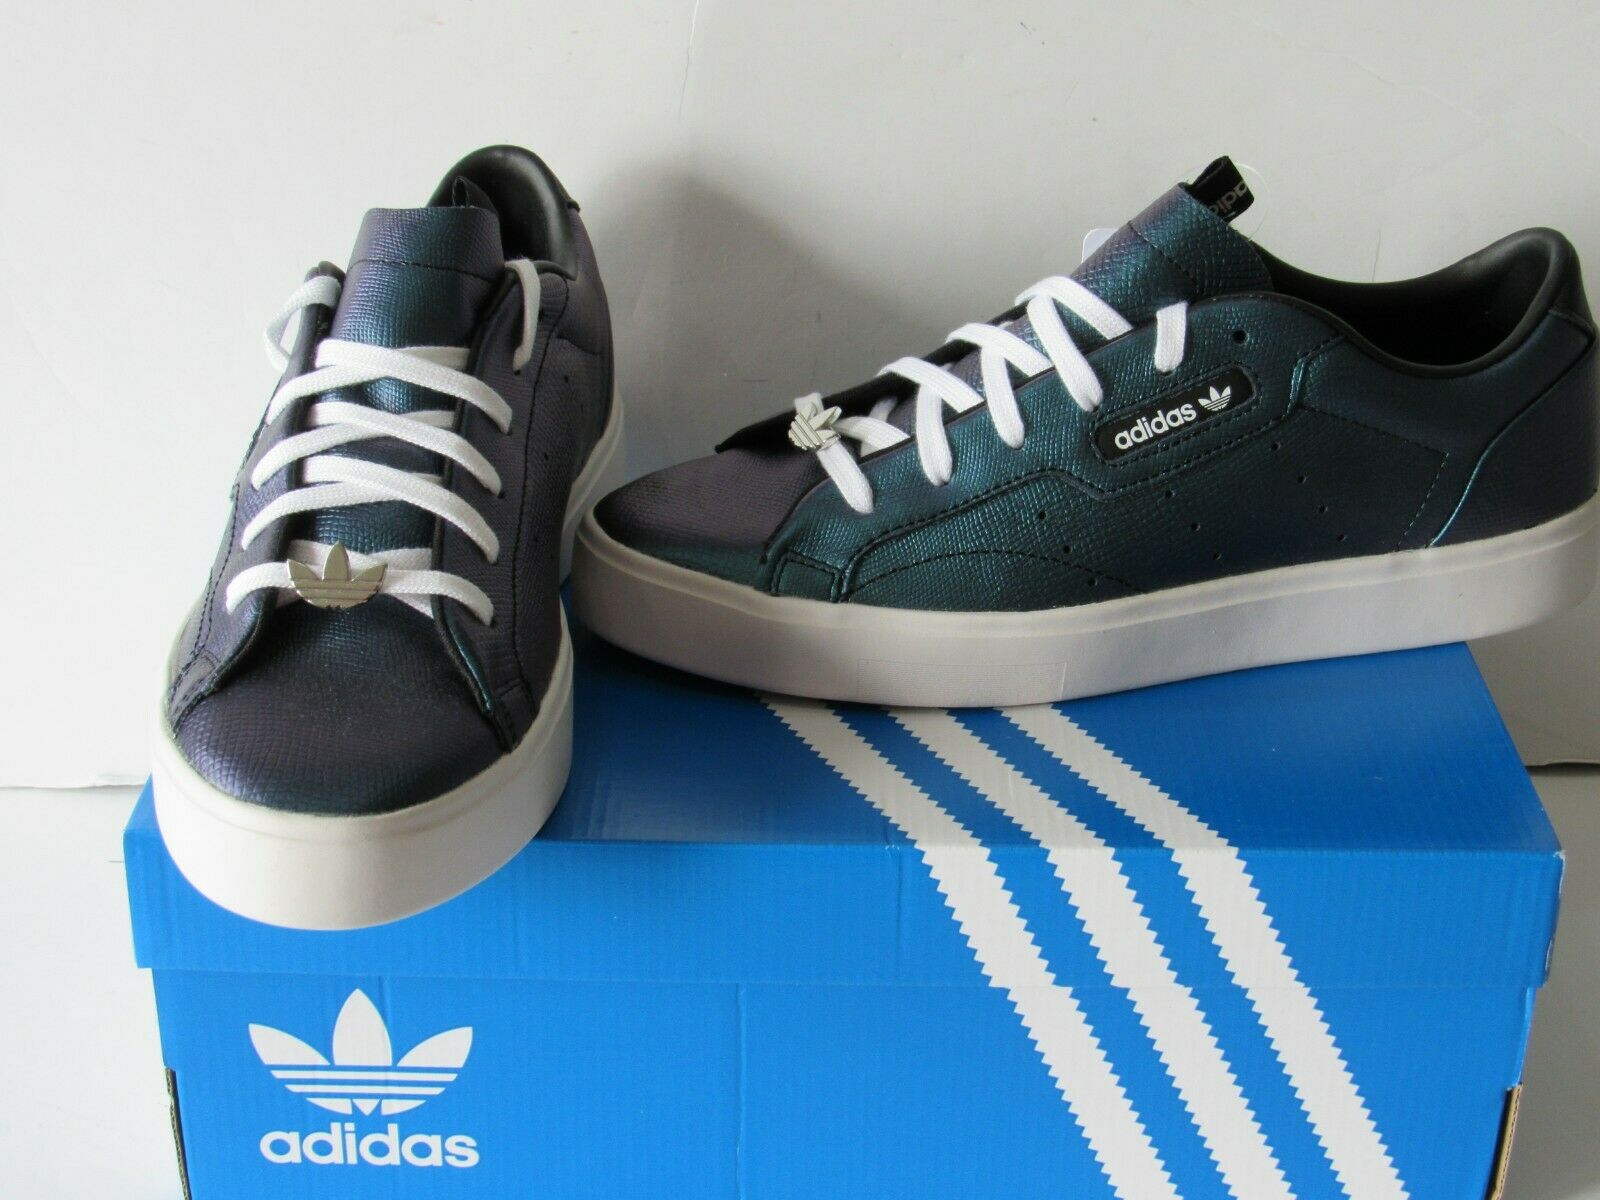 adidas Originals Blue/Green LEATHER Sleek Lace-Up Sneakers Womens size 7.5 NEW